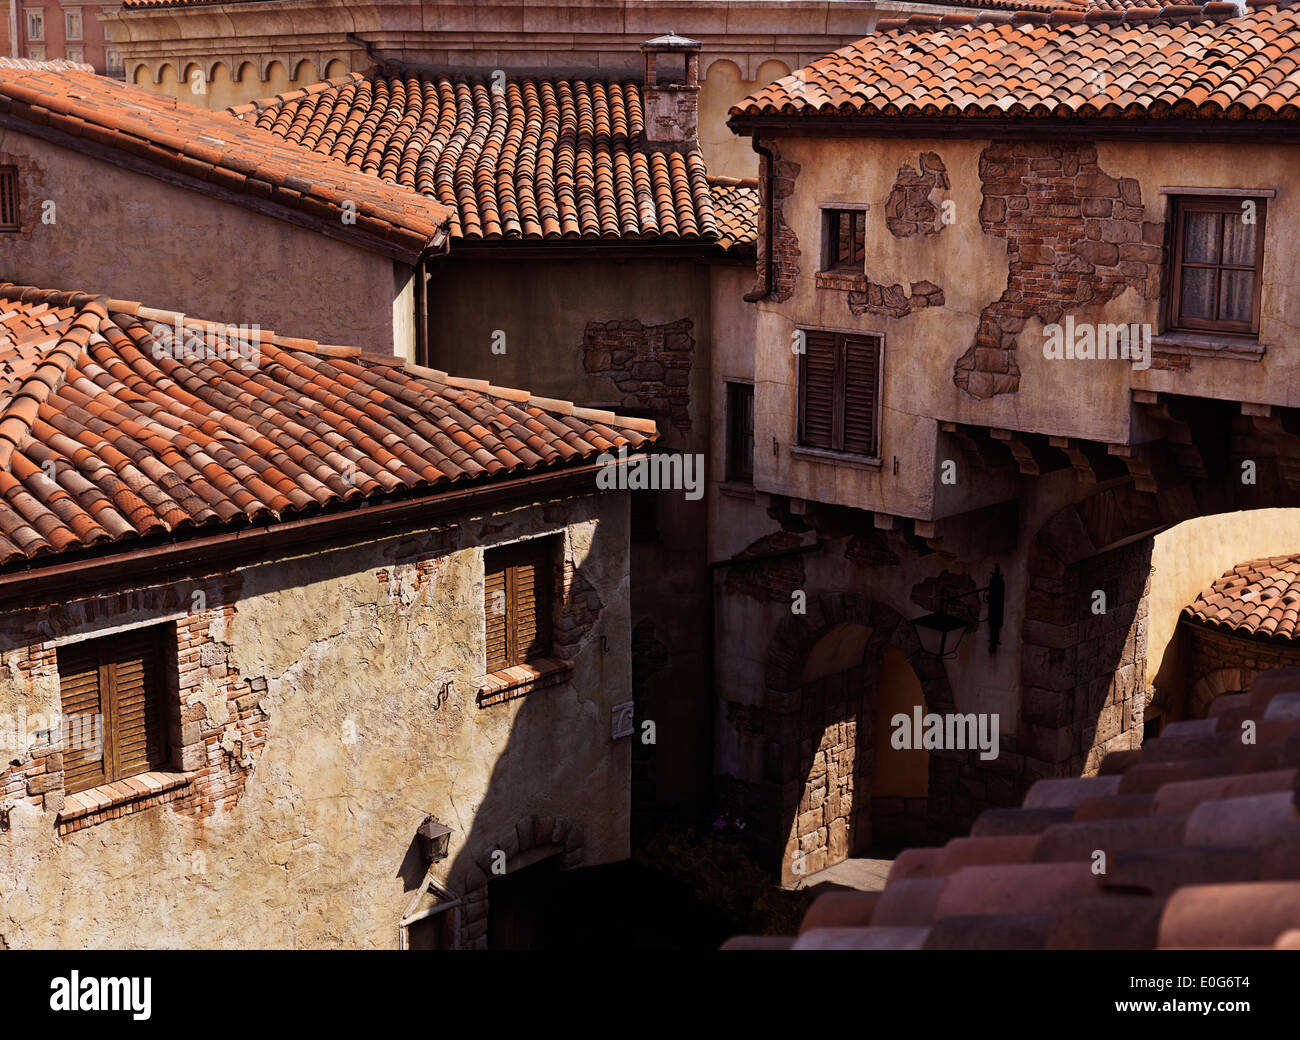 Rustic old houses with tiled roofs, architecture in Venetian style Stock Photo